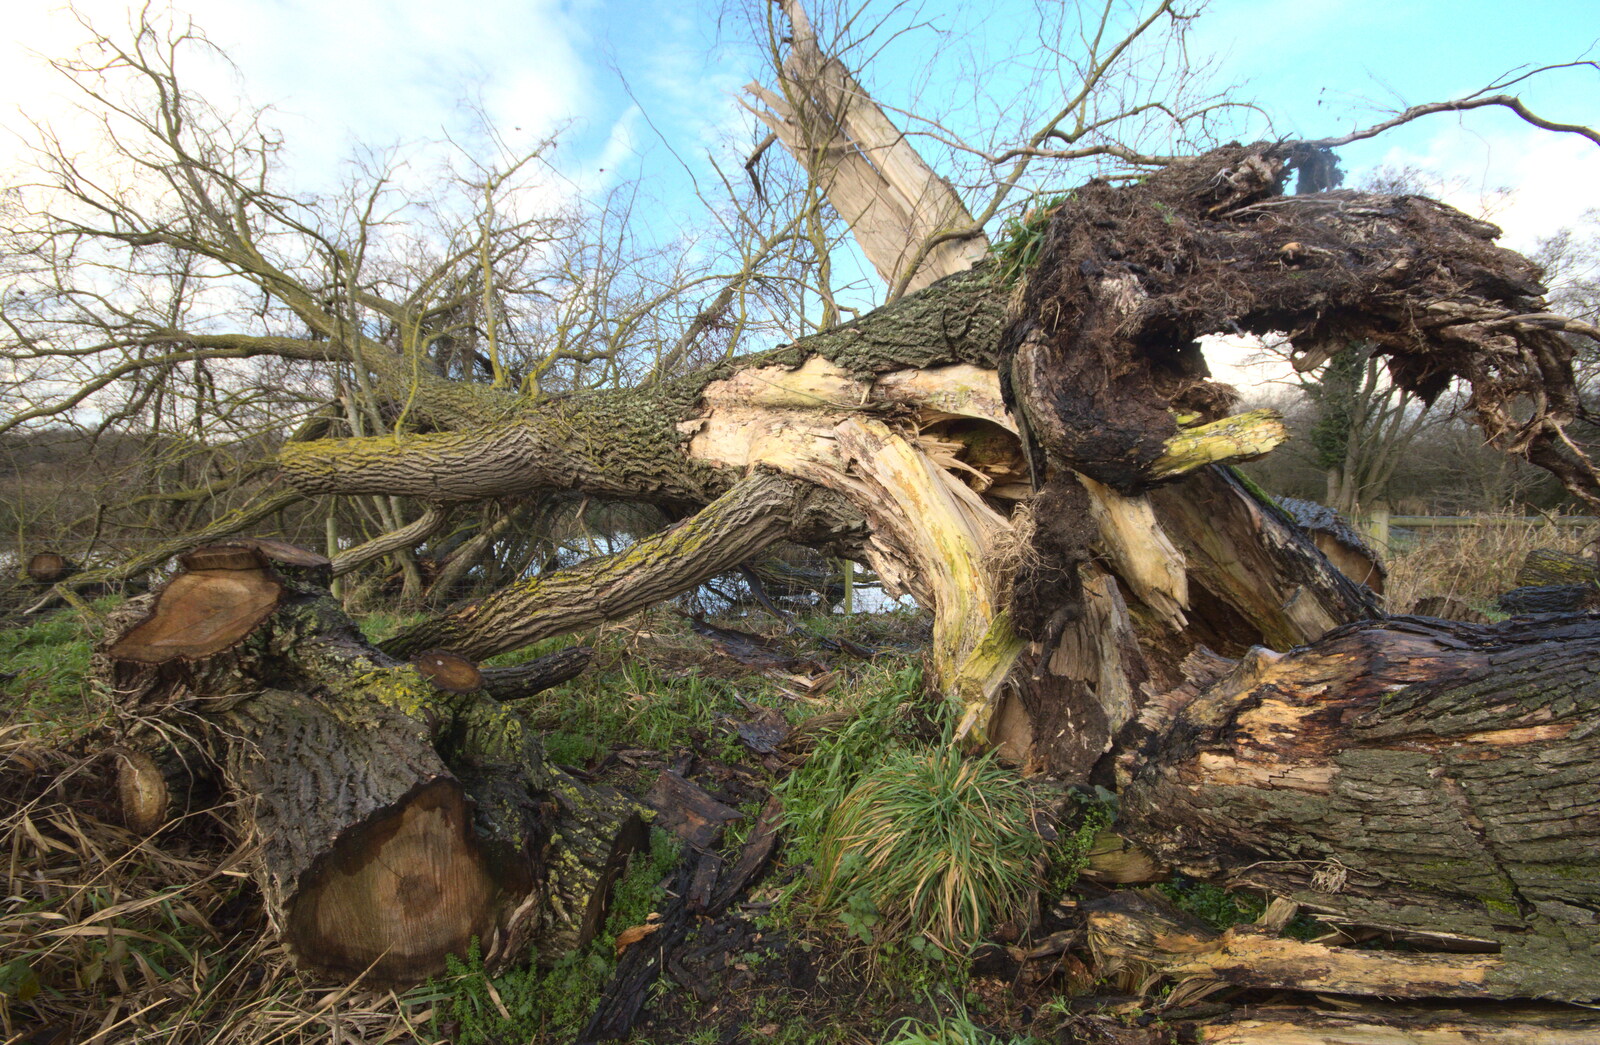 A big fallen tree from A Walk Around Redgrave and Lopham Fen, Redgrave, Suffolk - 3rd January 2021